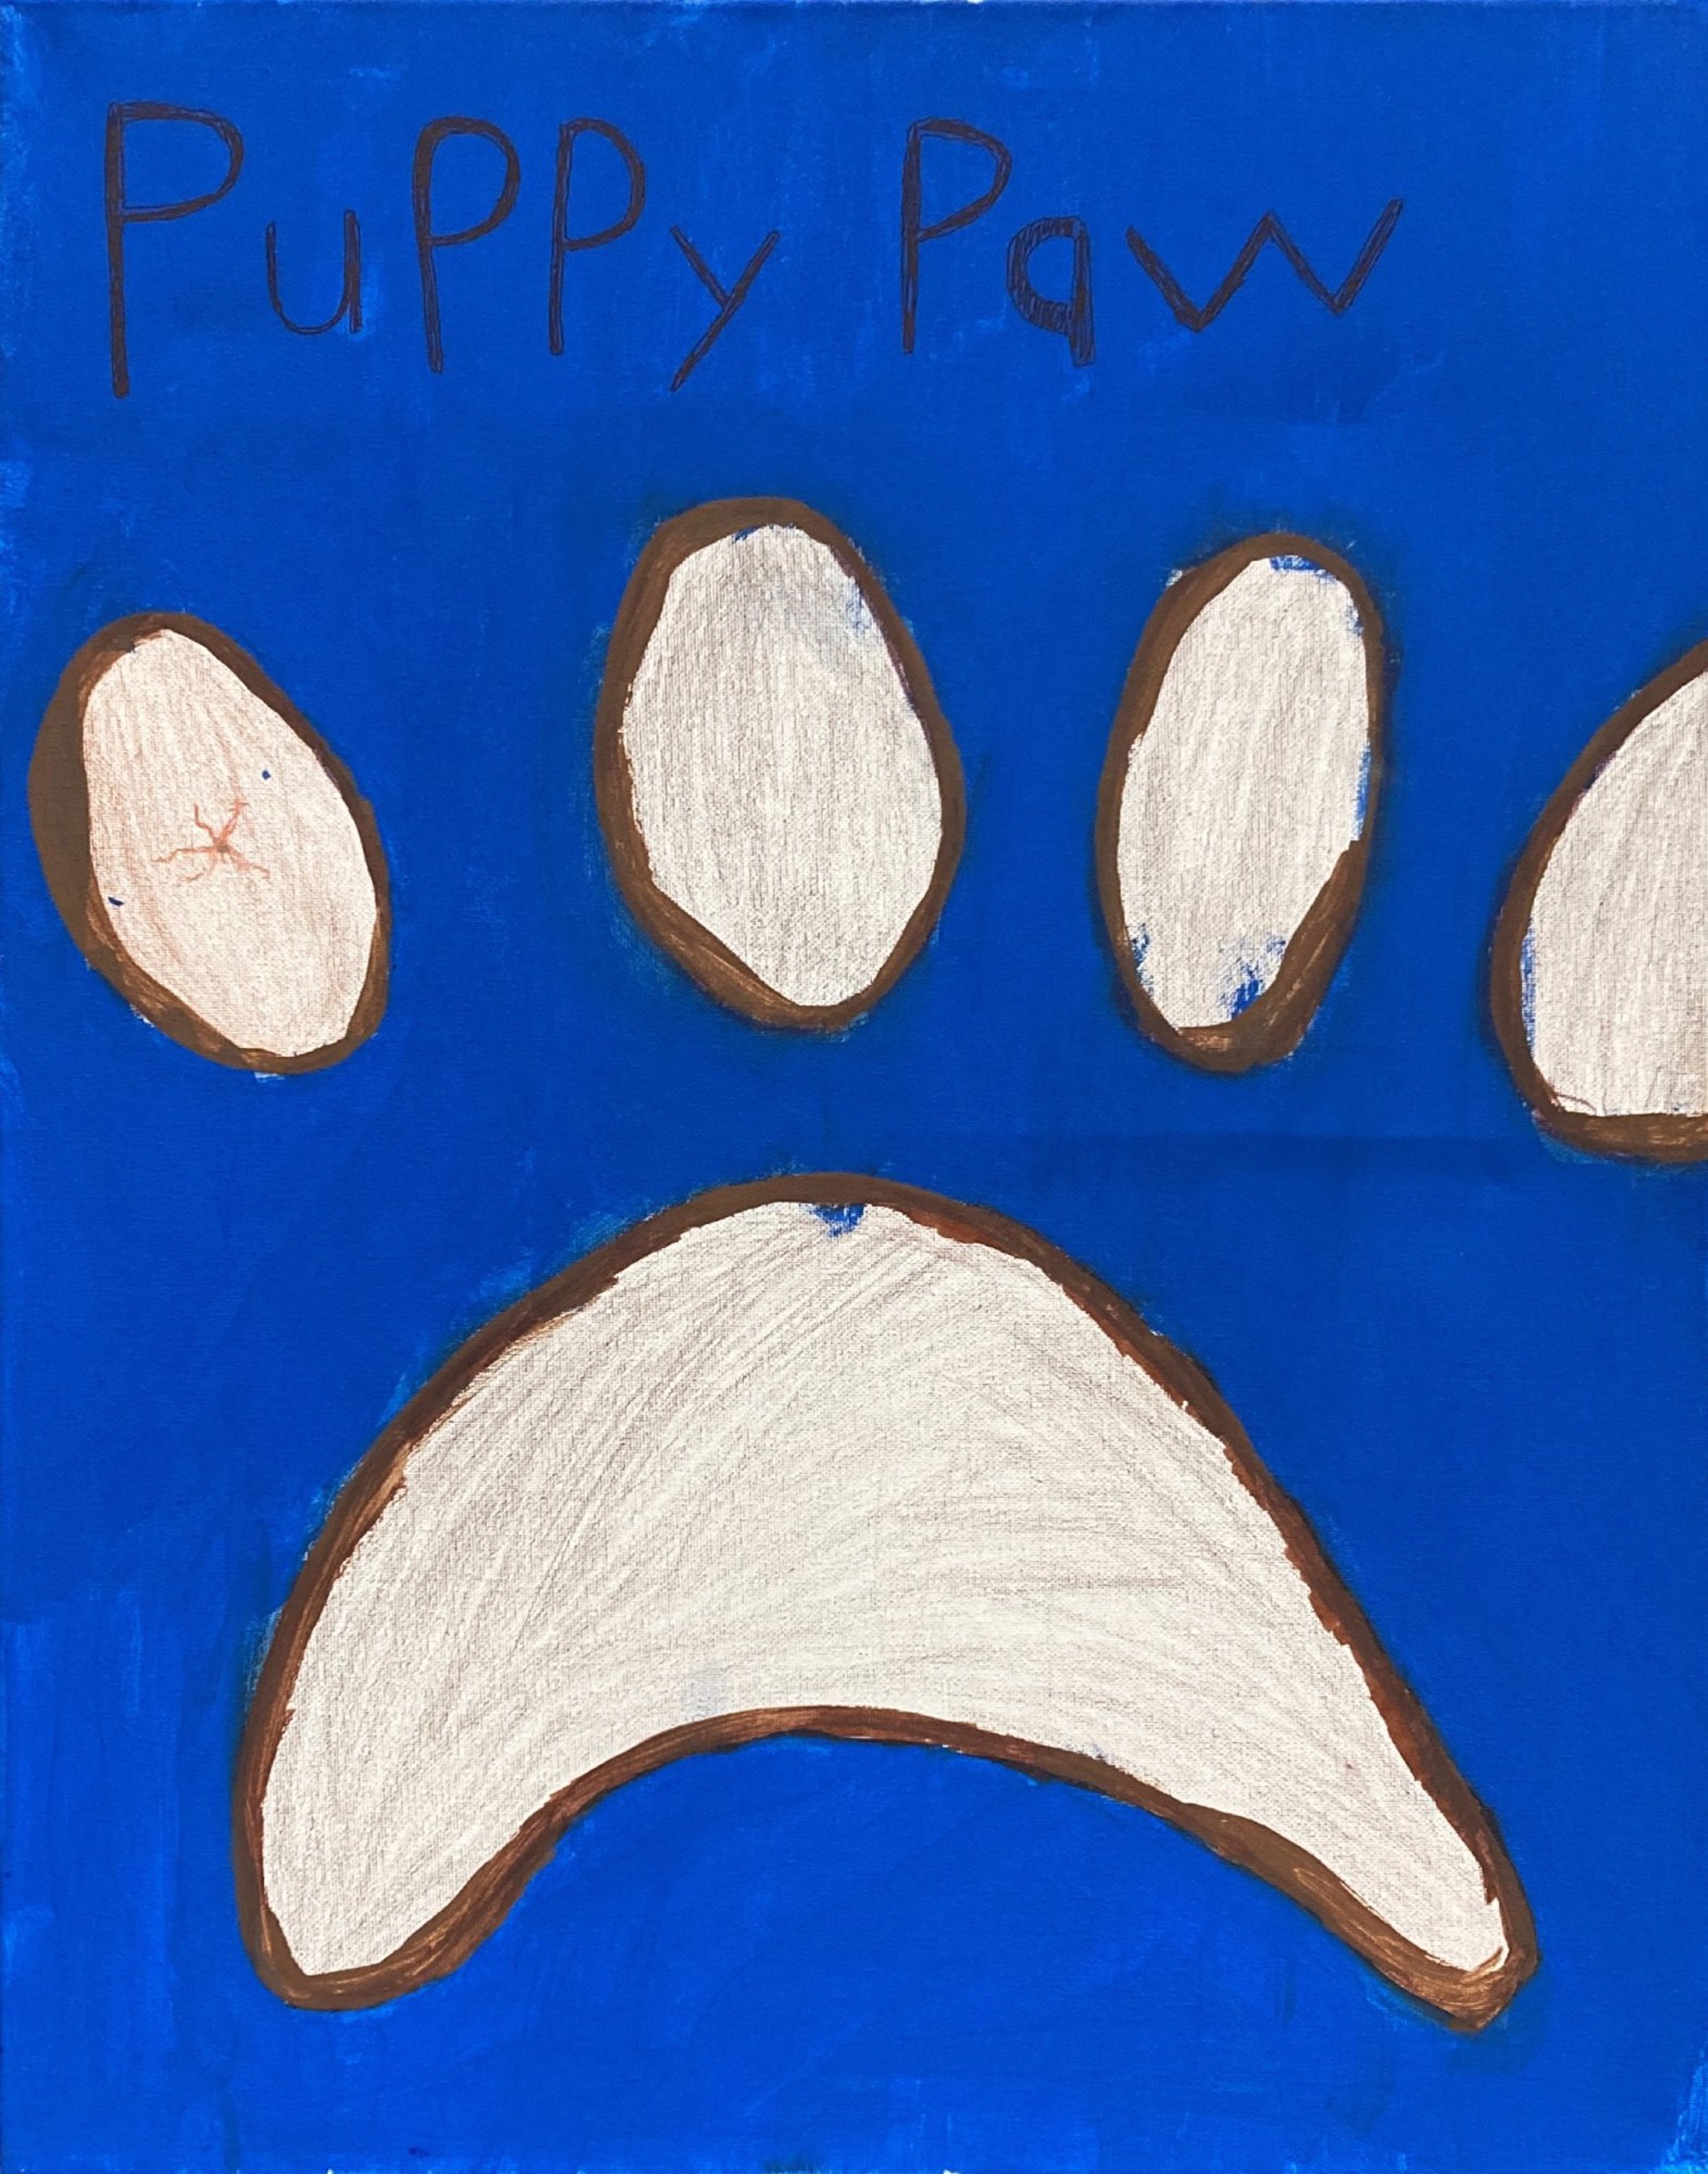 "Puppy Paw" by Trenton (Autism Academy) by Art One Foundation